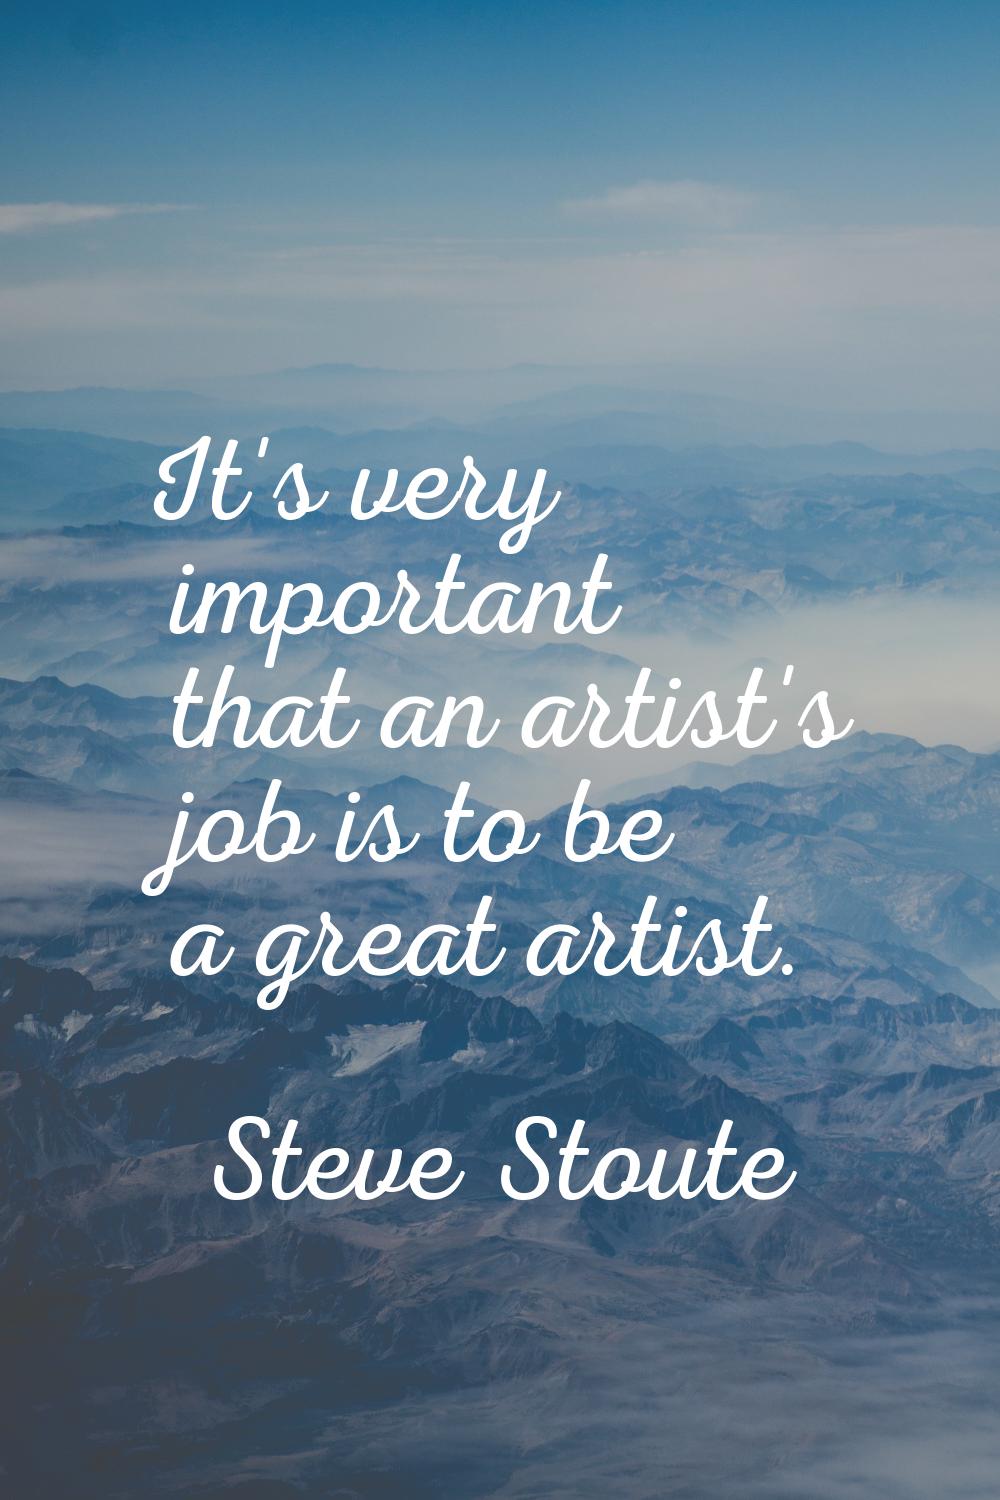 It's very important that an artist's job is to be a great artist.